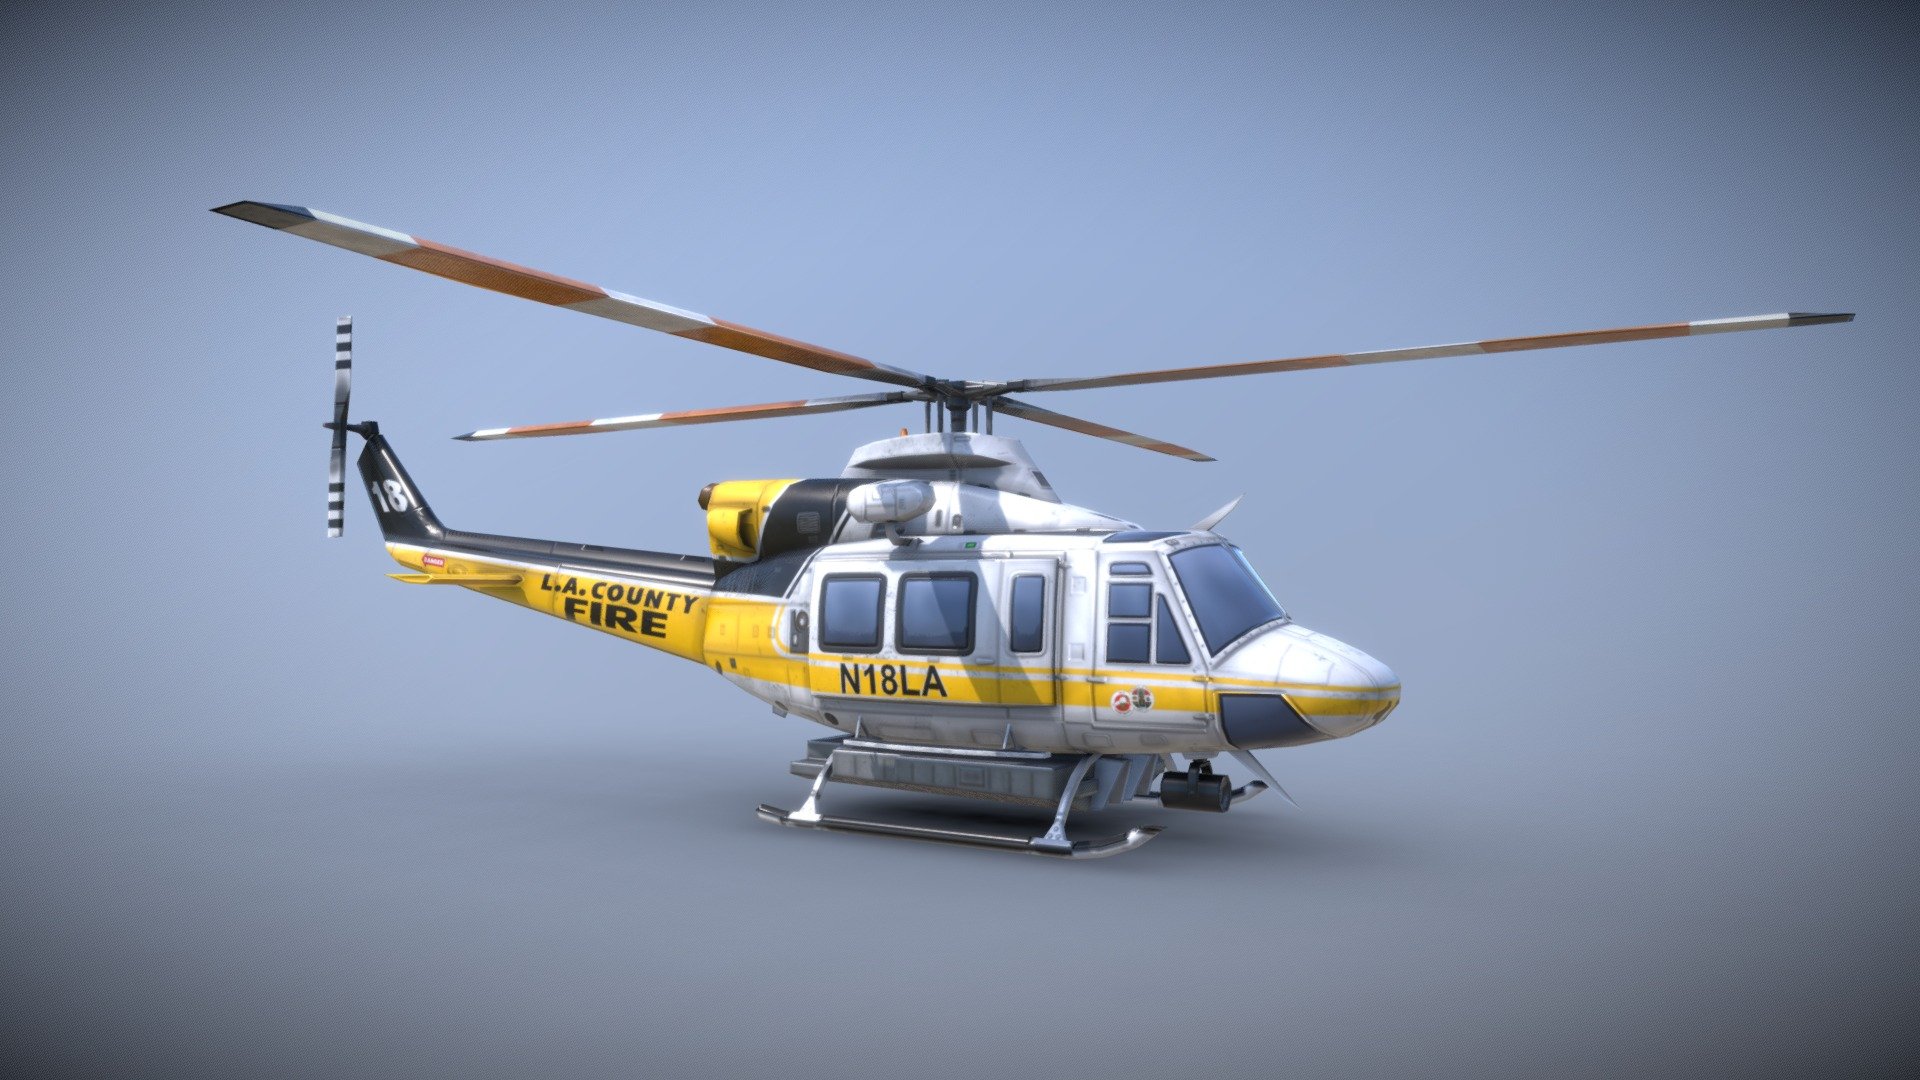 BELL 412 L.A. COUNTY FIRE